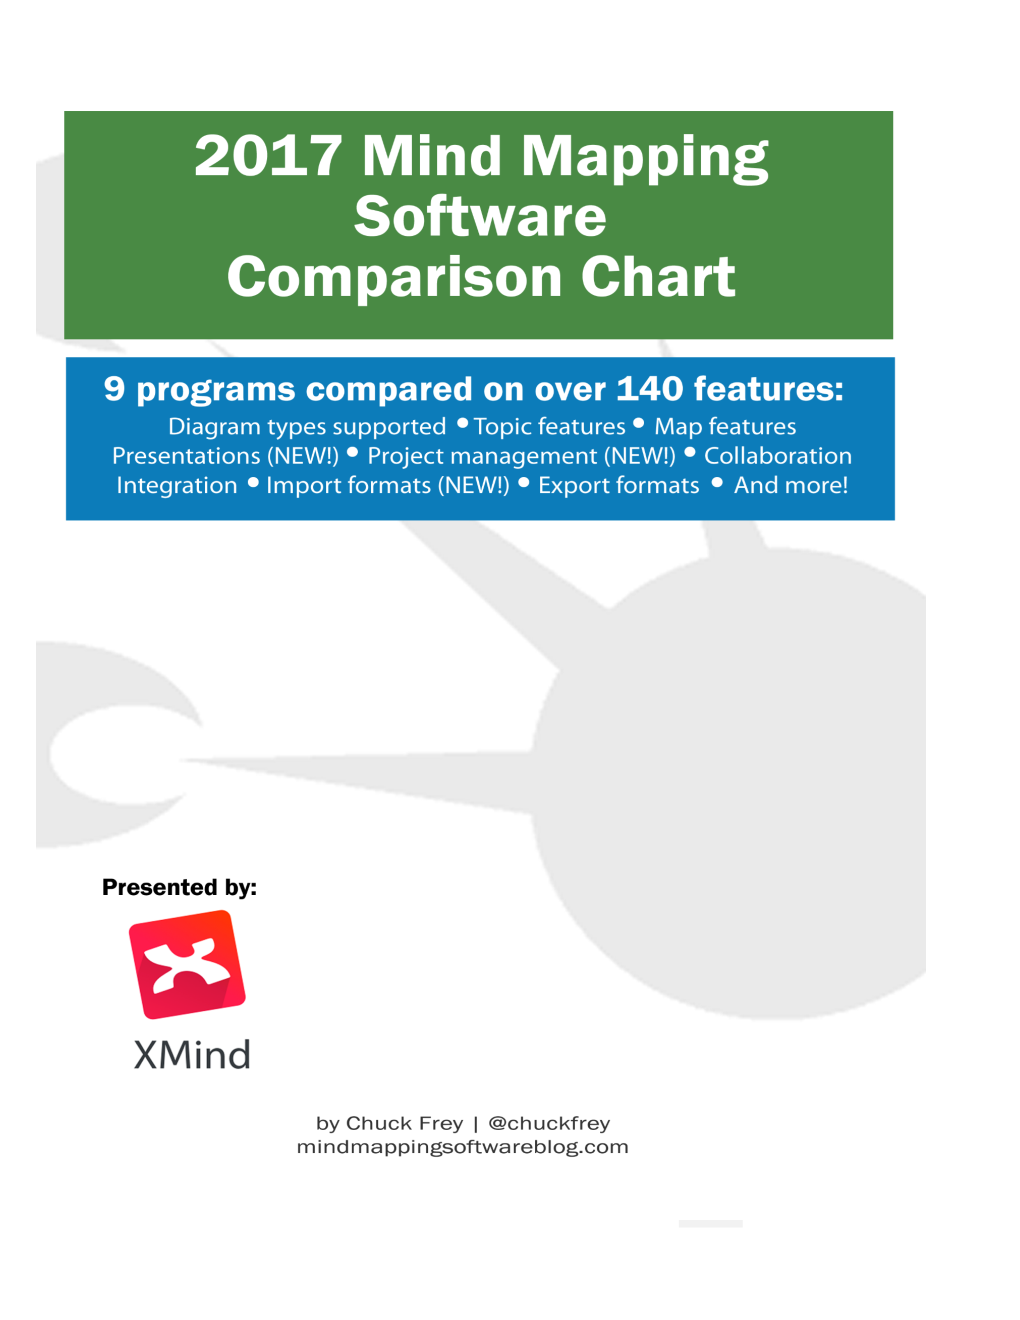 2017 Mind Mapping Software Comparison Chart